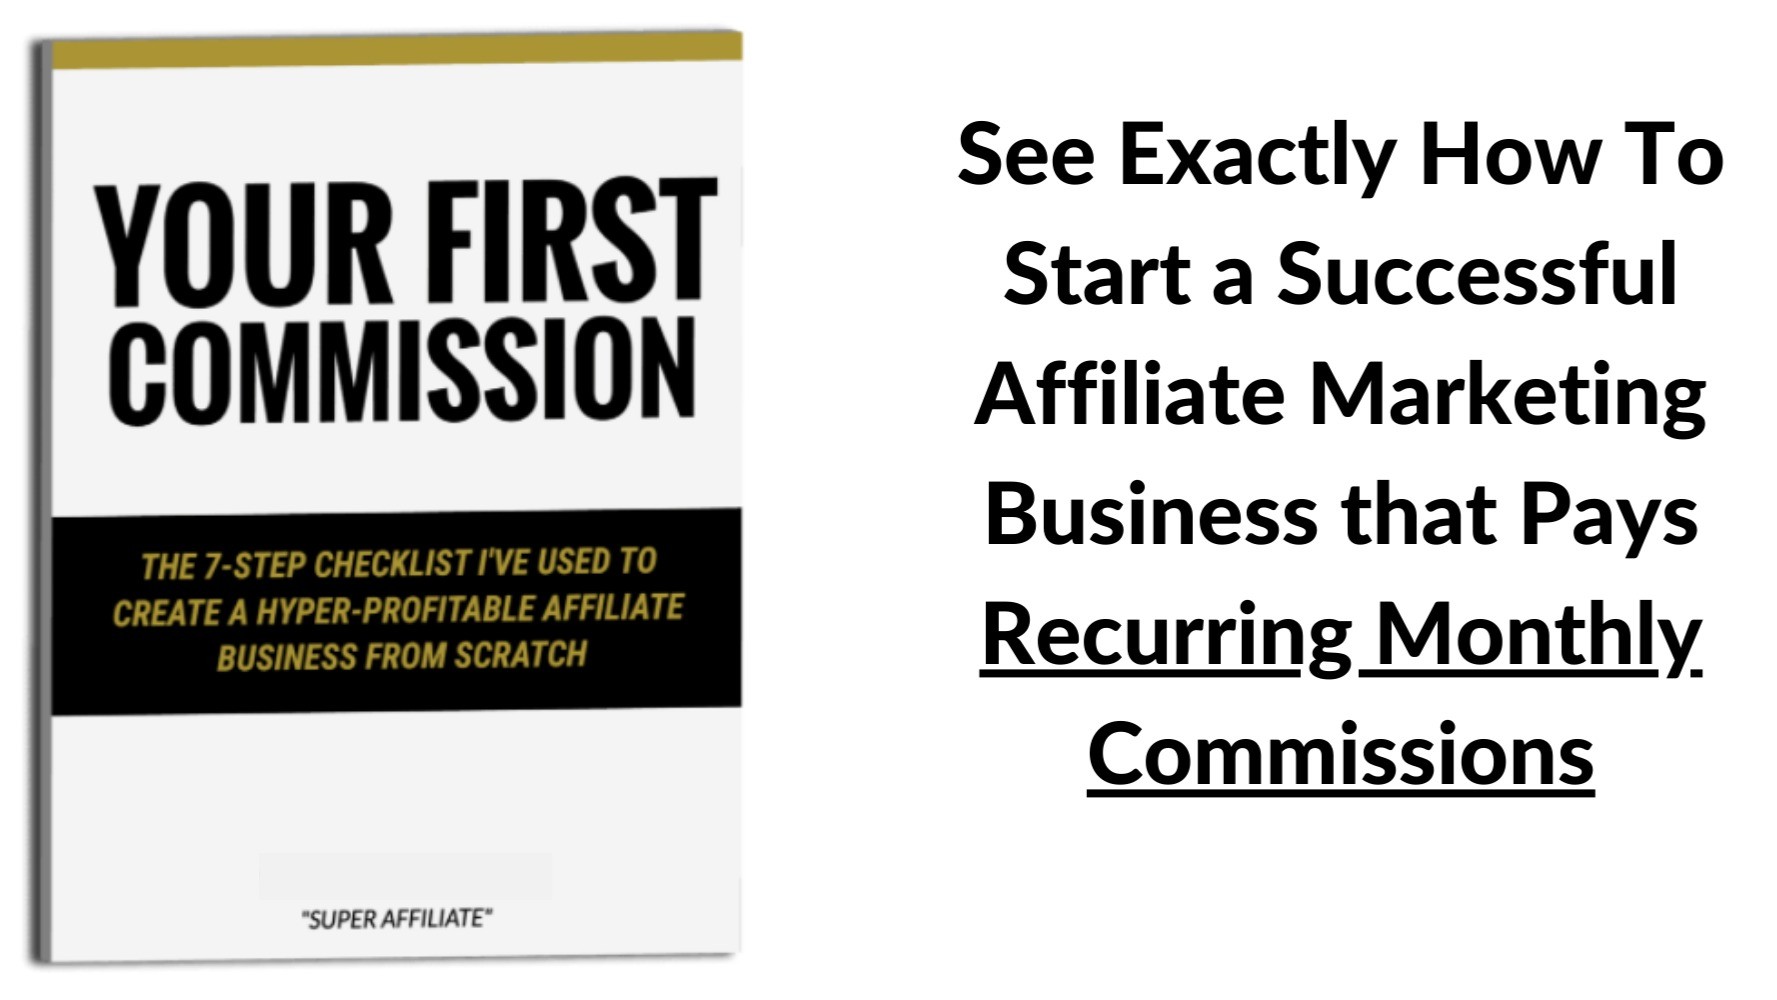 A Short Guide to Starting an Affiliate Marketing Business